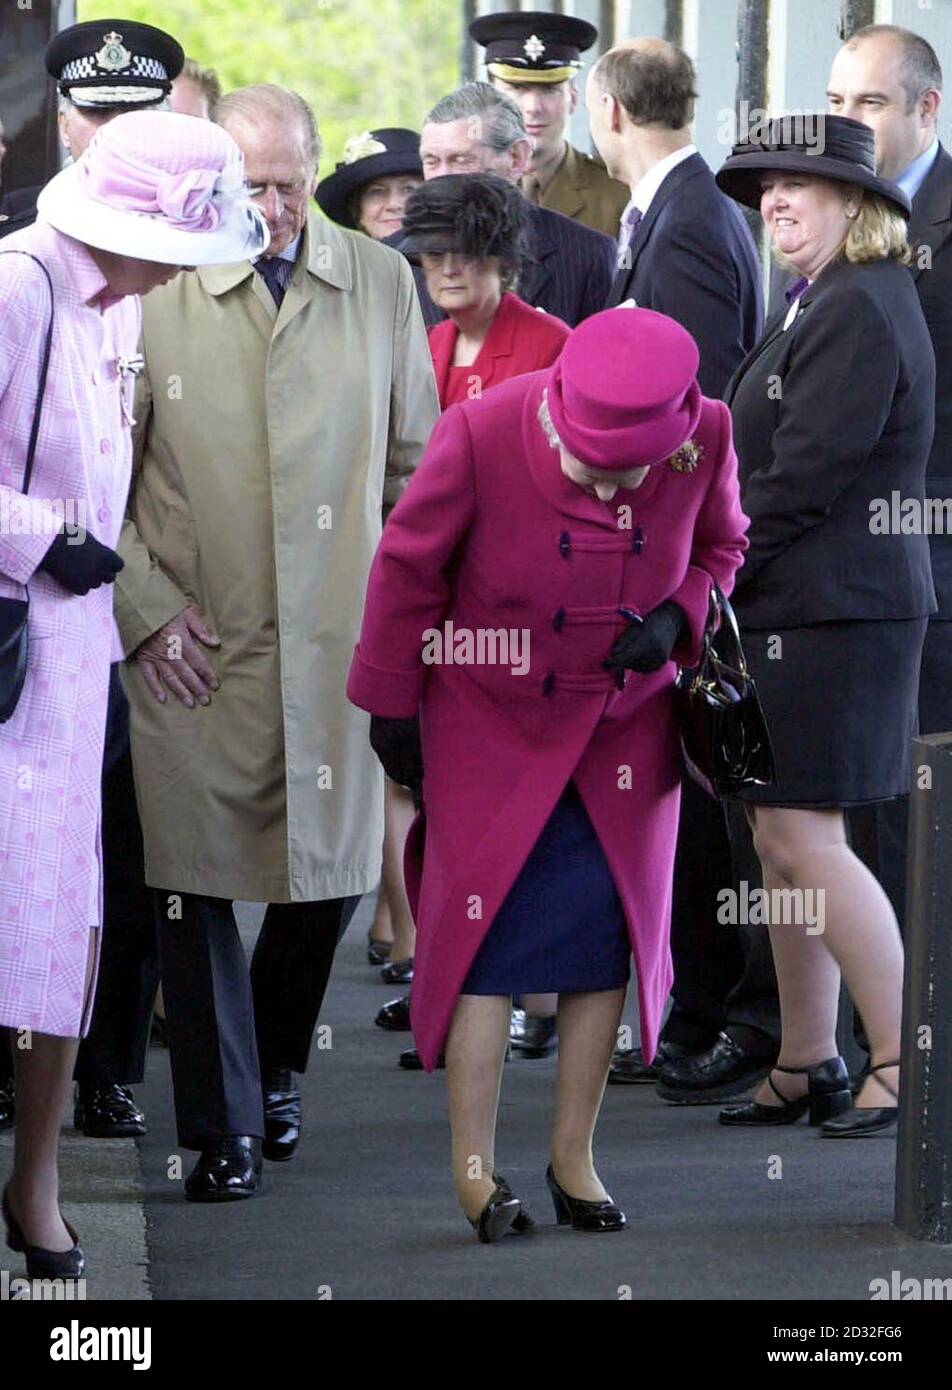 Britain's Queen Elizabeth II examines the sole of her shoe as she is accompanied by the Duke of Edinburgh and the Lord Lieutenant of Cornwall Lady Mary Holborow (left) on the railway station platform at Falmouth on the first day of her nationwide Golden Jubilee tour. *... which is starting with a two-day visit to the West Country. In the coming weeks, the 76-year-old monarch will visit every region of England, Scotland, Wales and Northern Ireland. Stock Photo